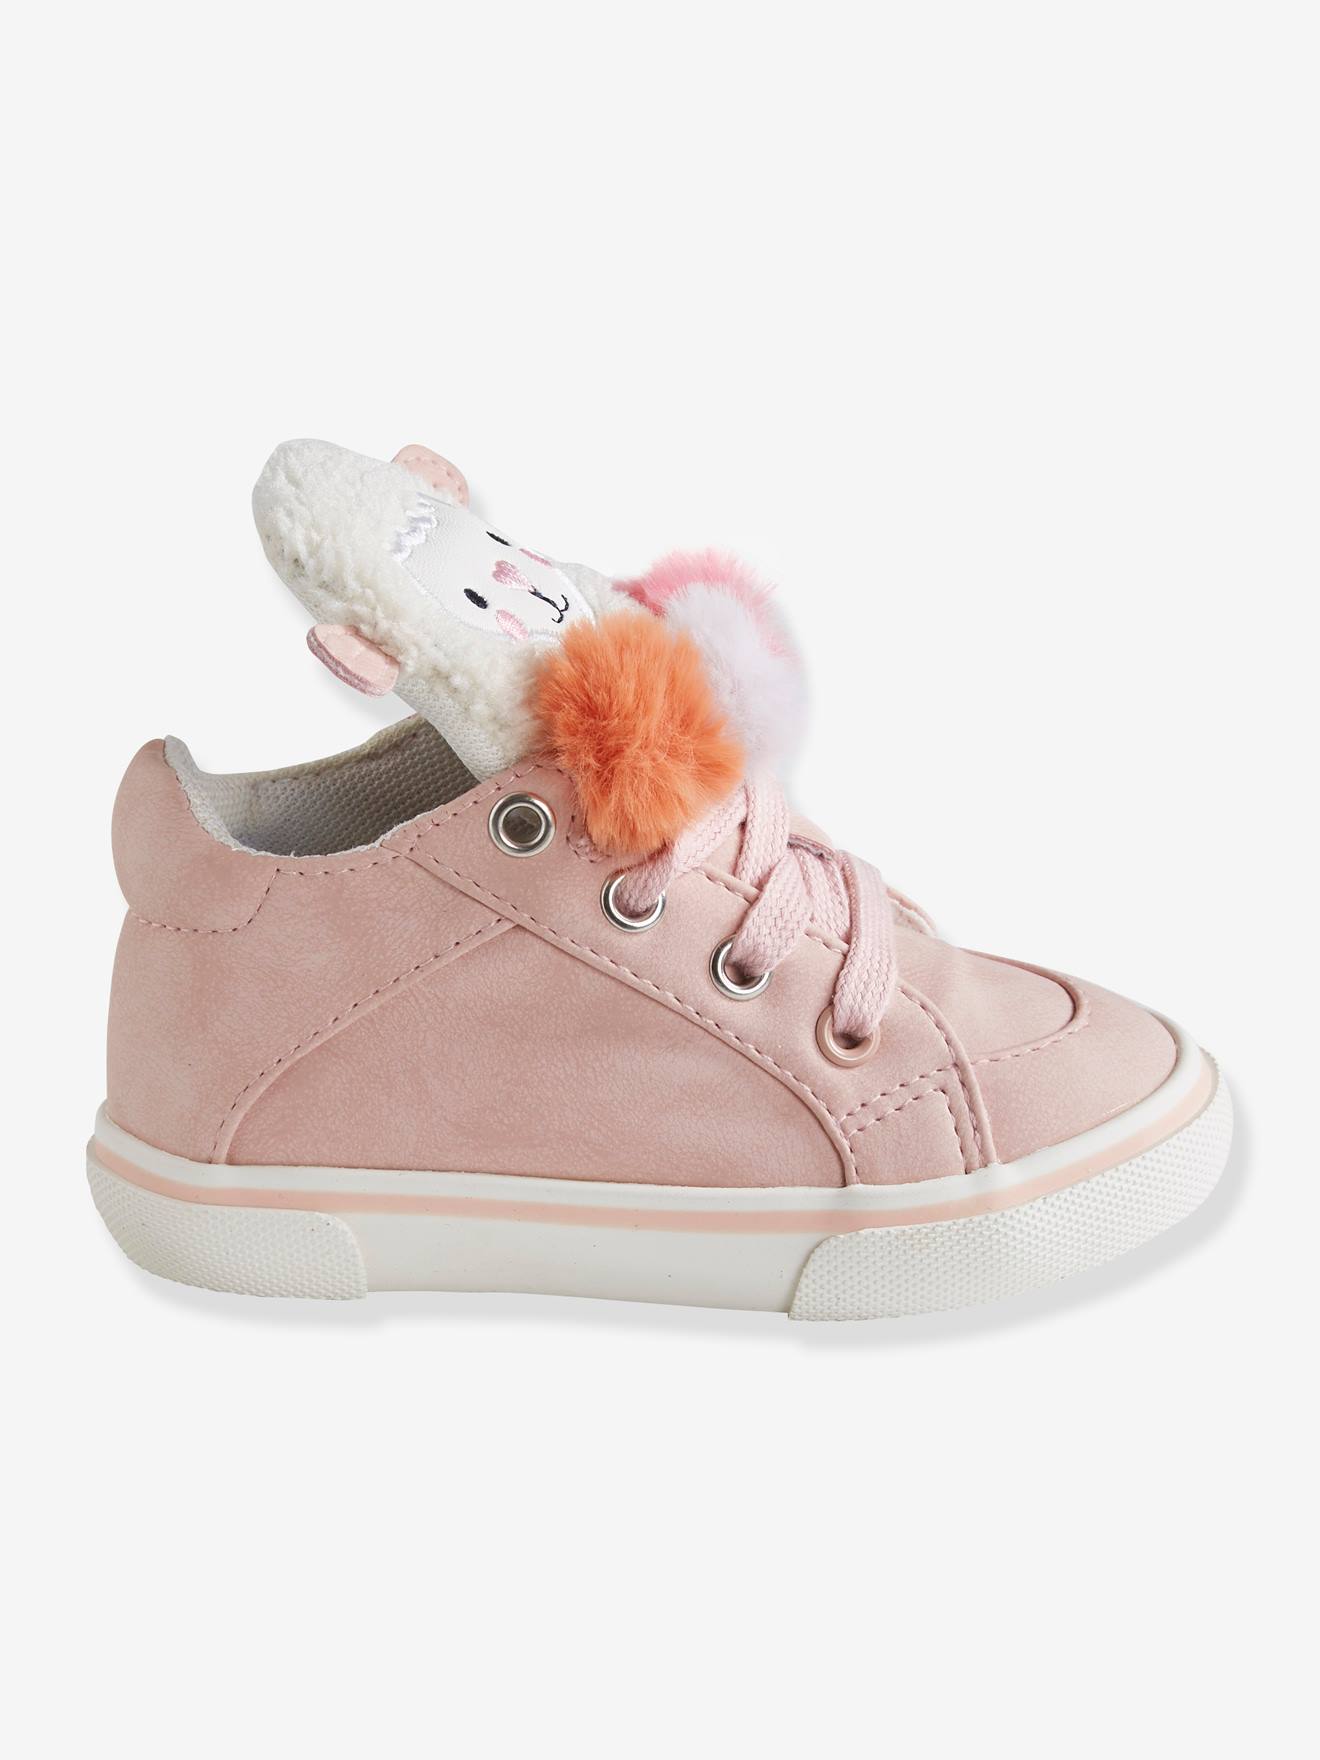 High Top Trainers for Baby 3 Pompons - light pink, Shoes | Vertbaudet